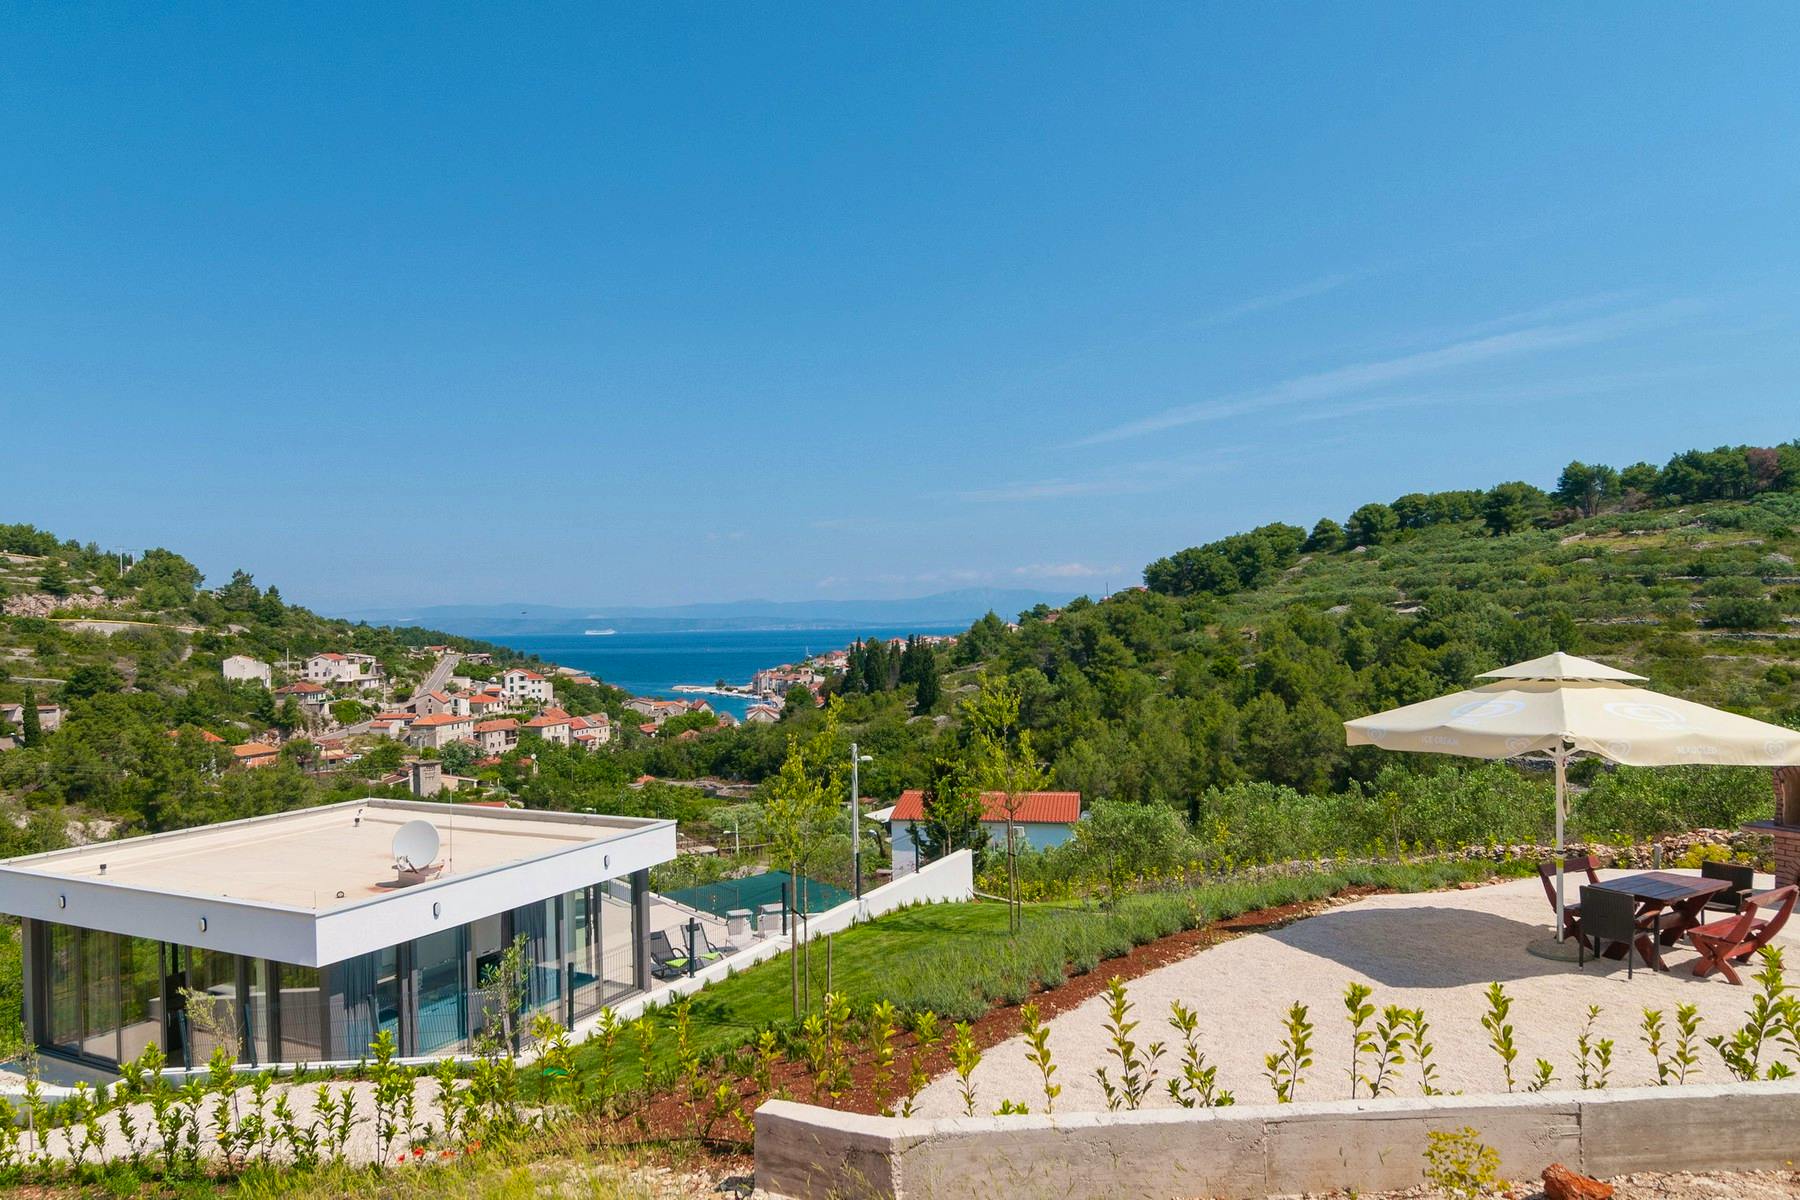 Spectacular sea view from the villa